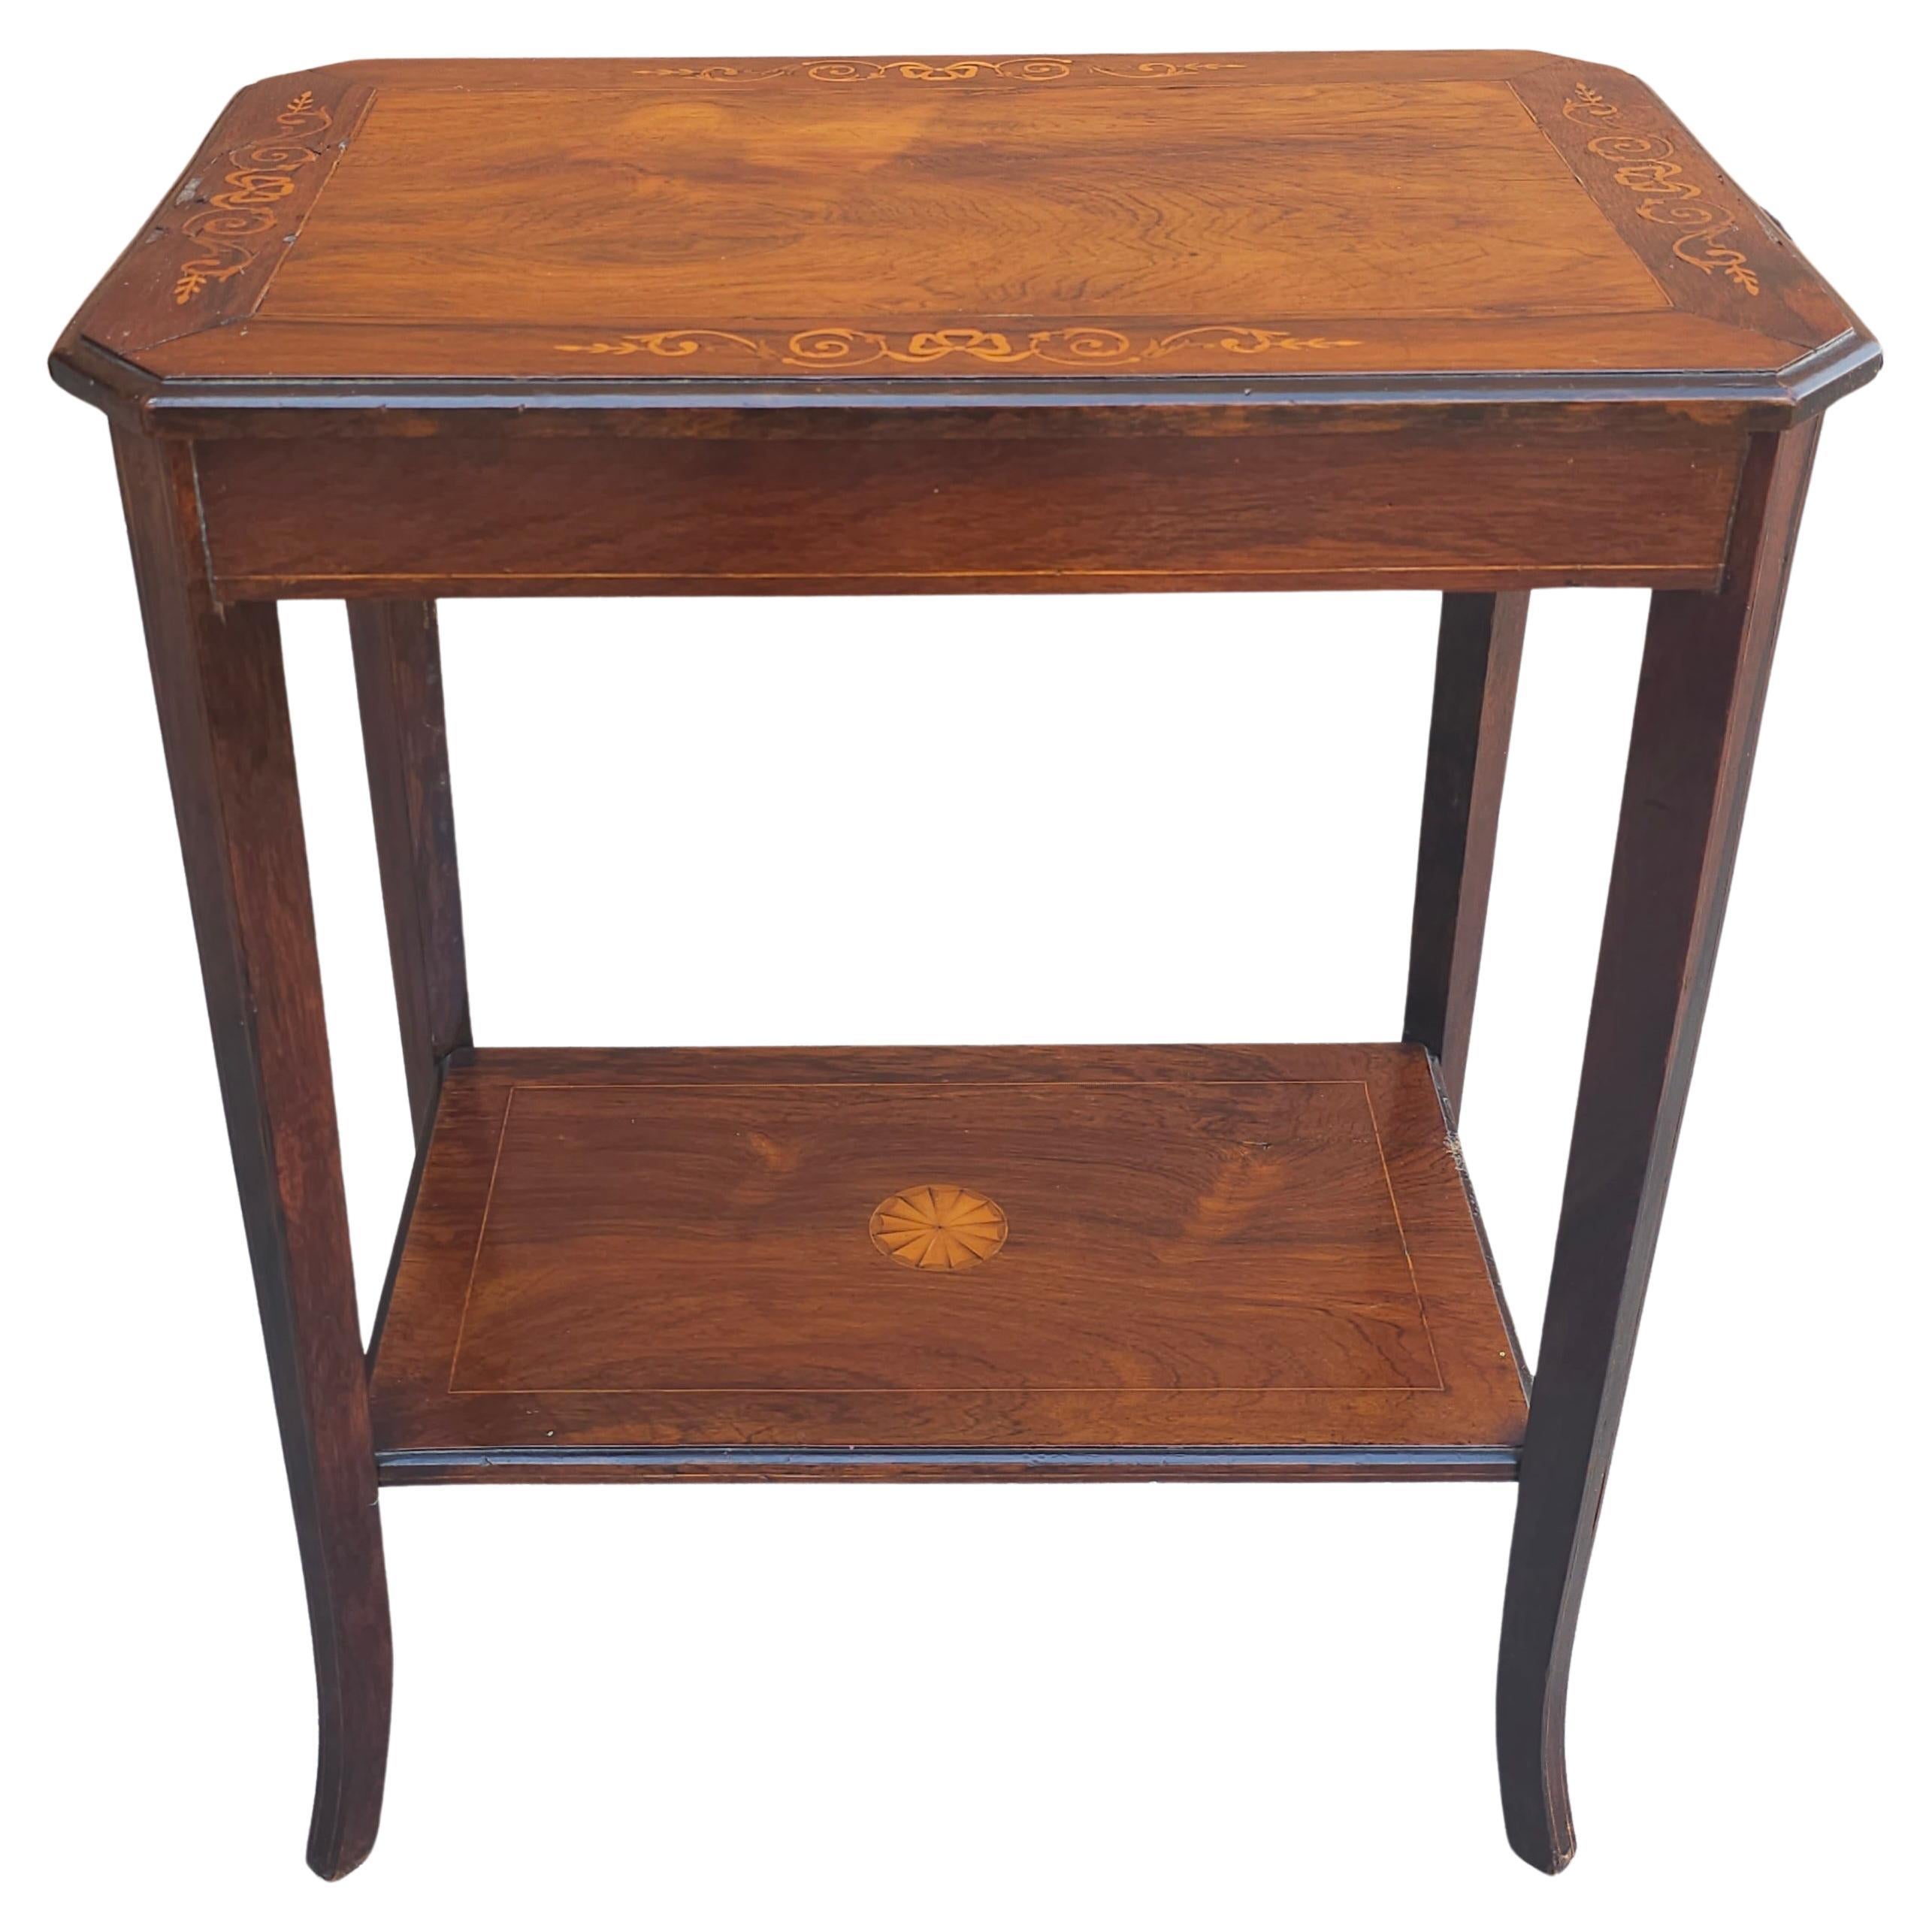 Early 20th C. Edwardian Rosewood Marquetry Inlaid  Side Table